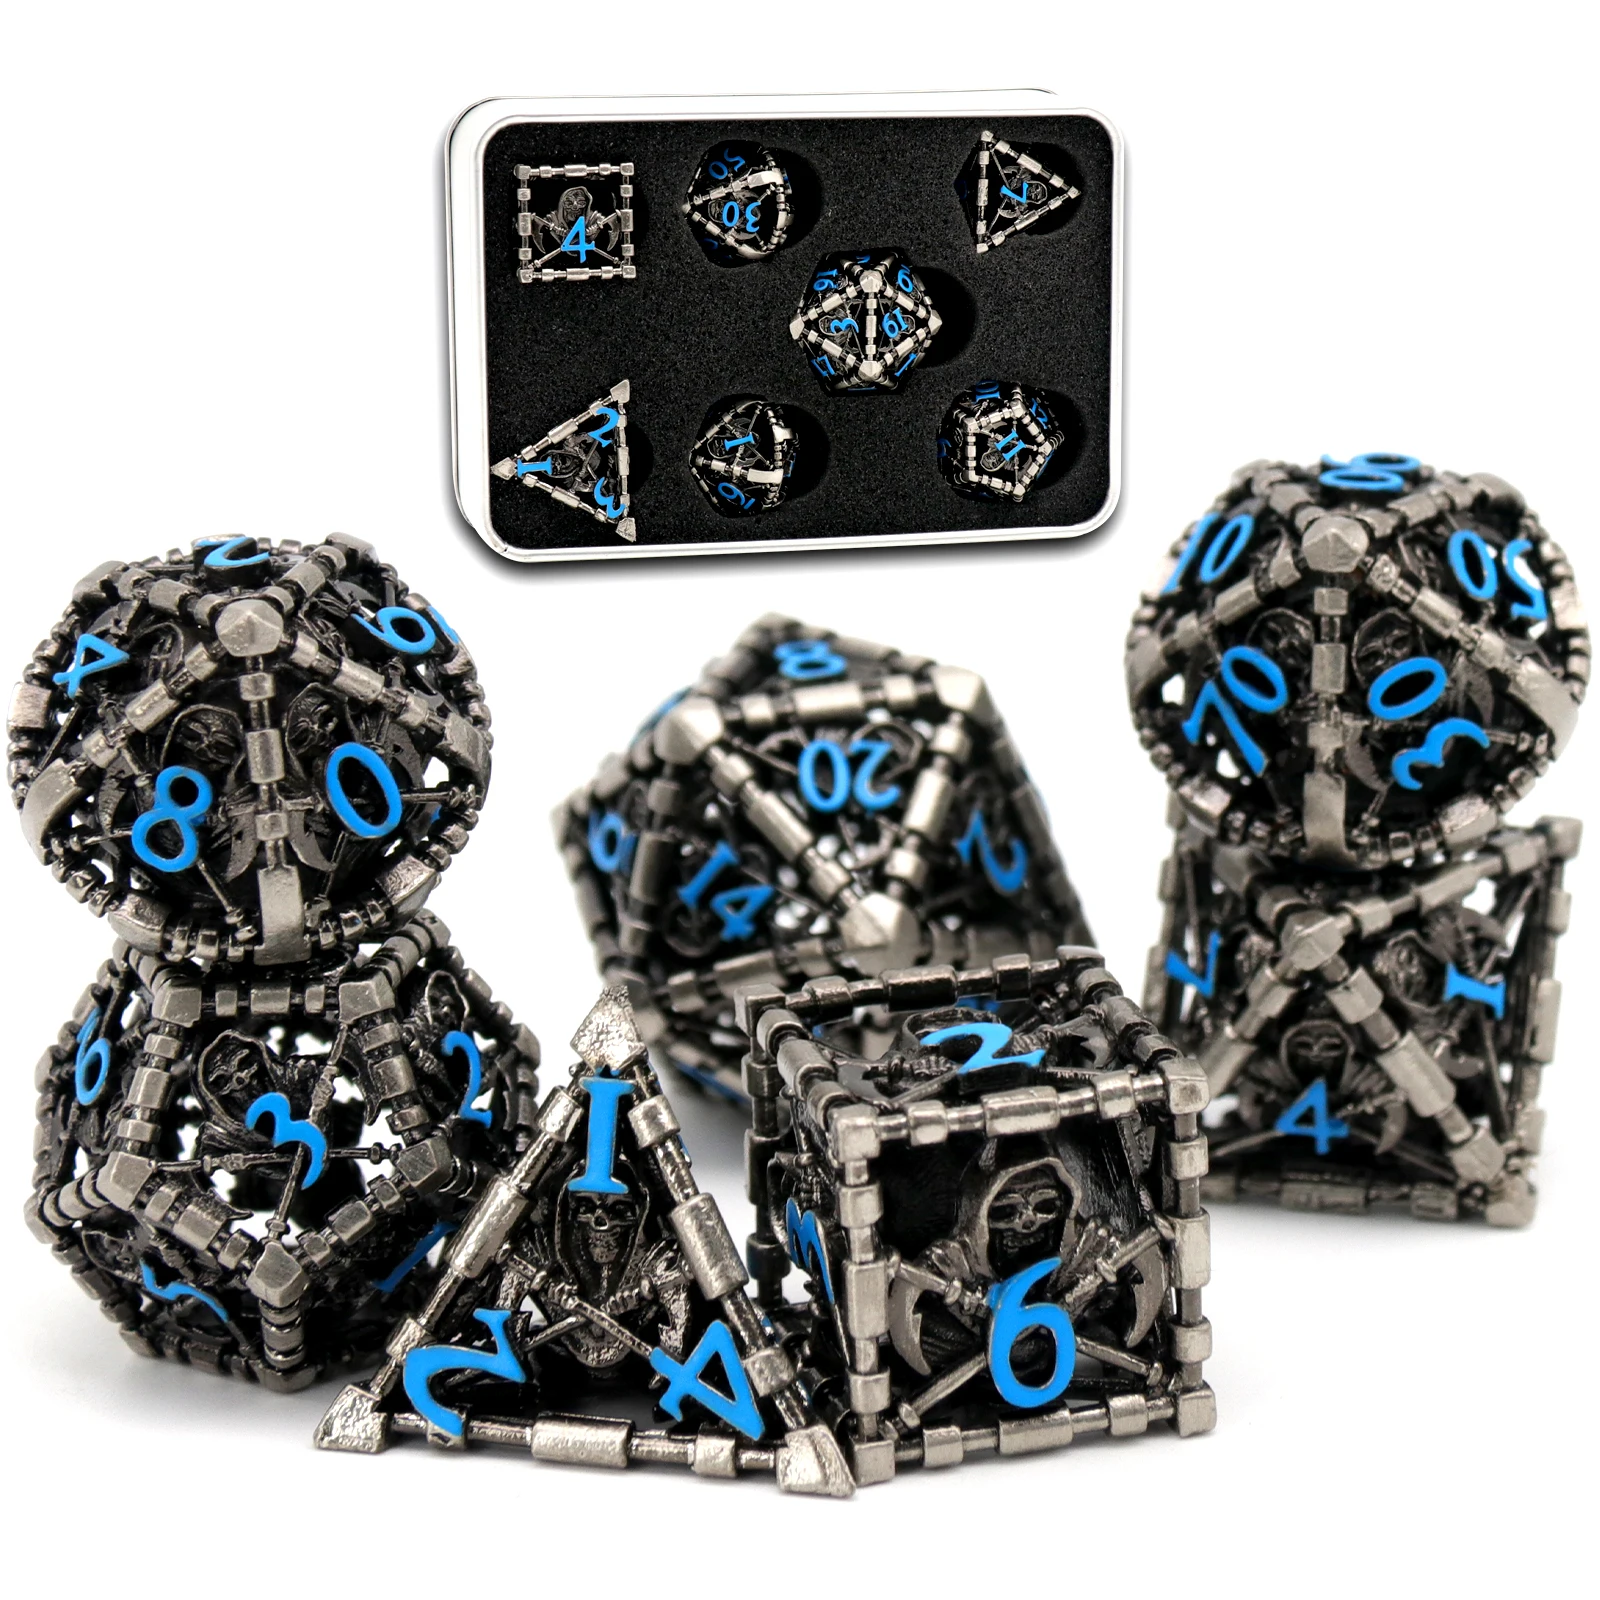 DND Dice Set Roleplaying Game, Polyhedral Dice Set D&D Dice Set Reaper Metal Hollow Dice for Board Game(Antique Silver Blue)